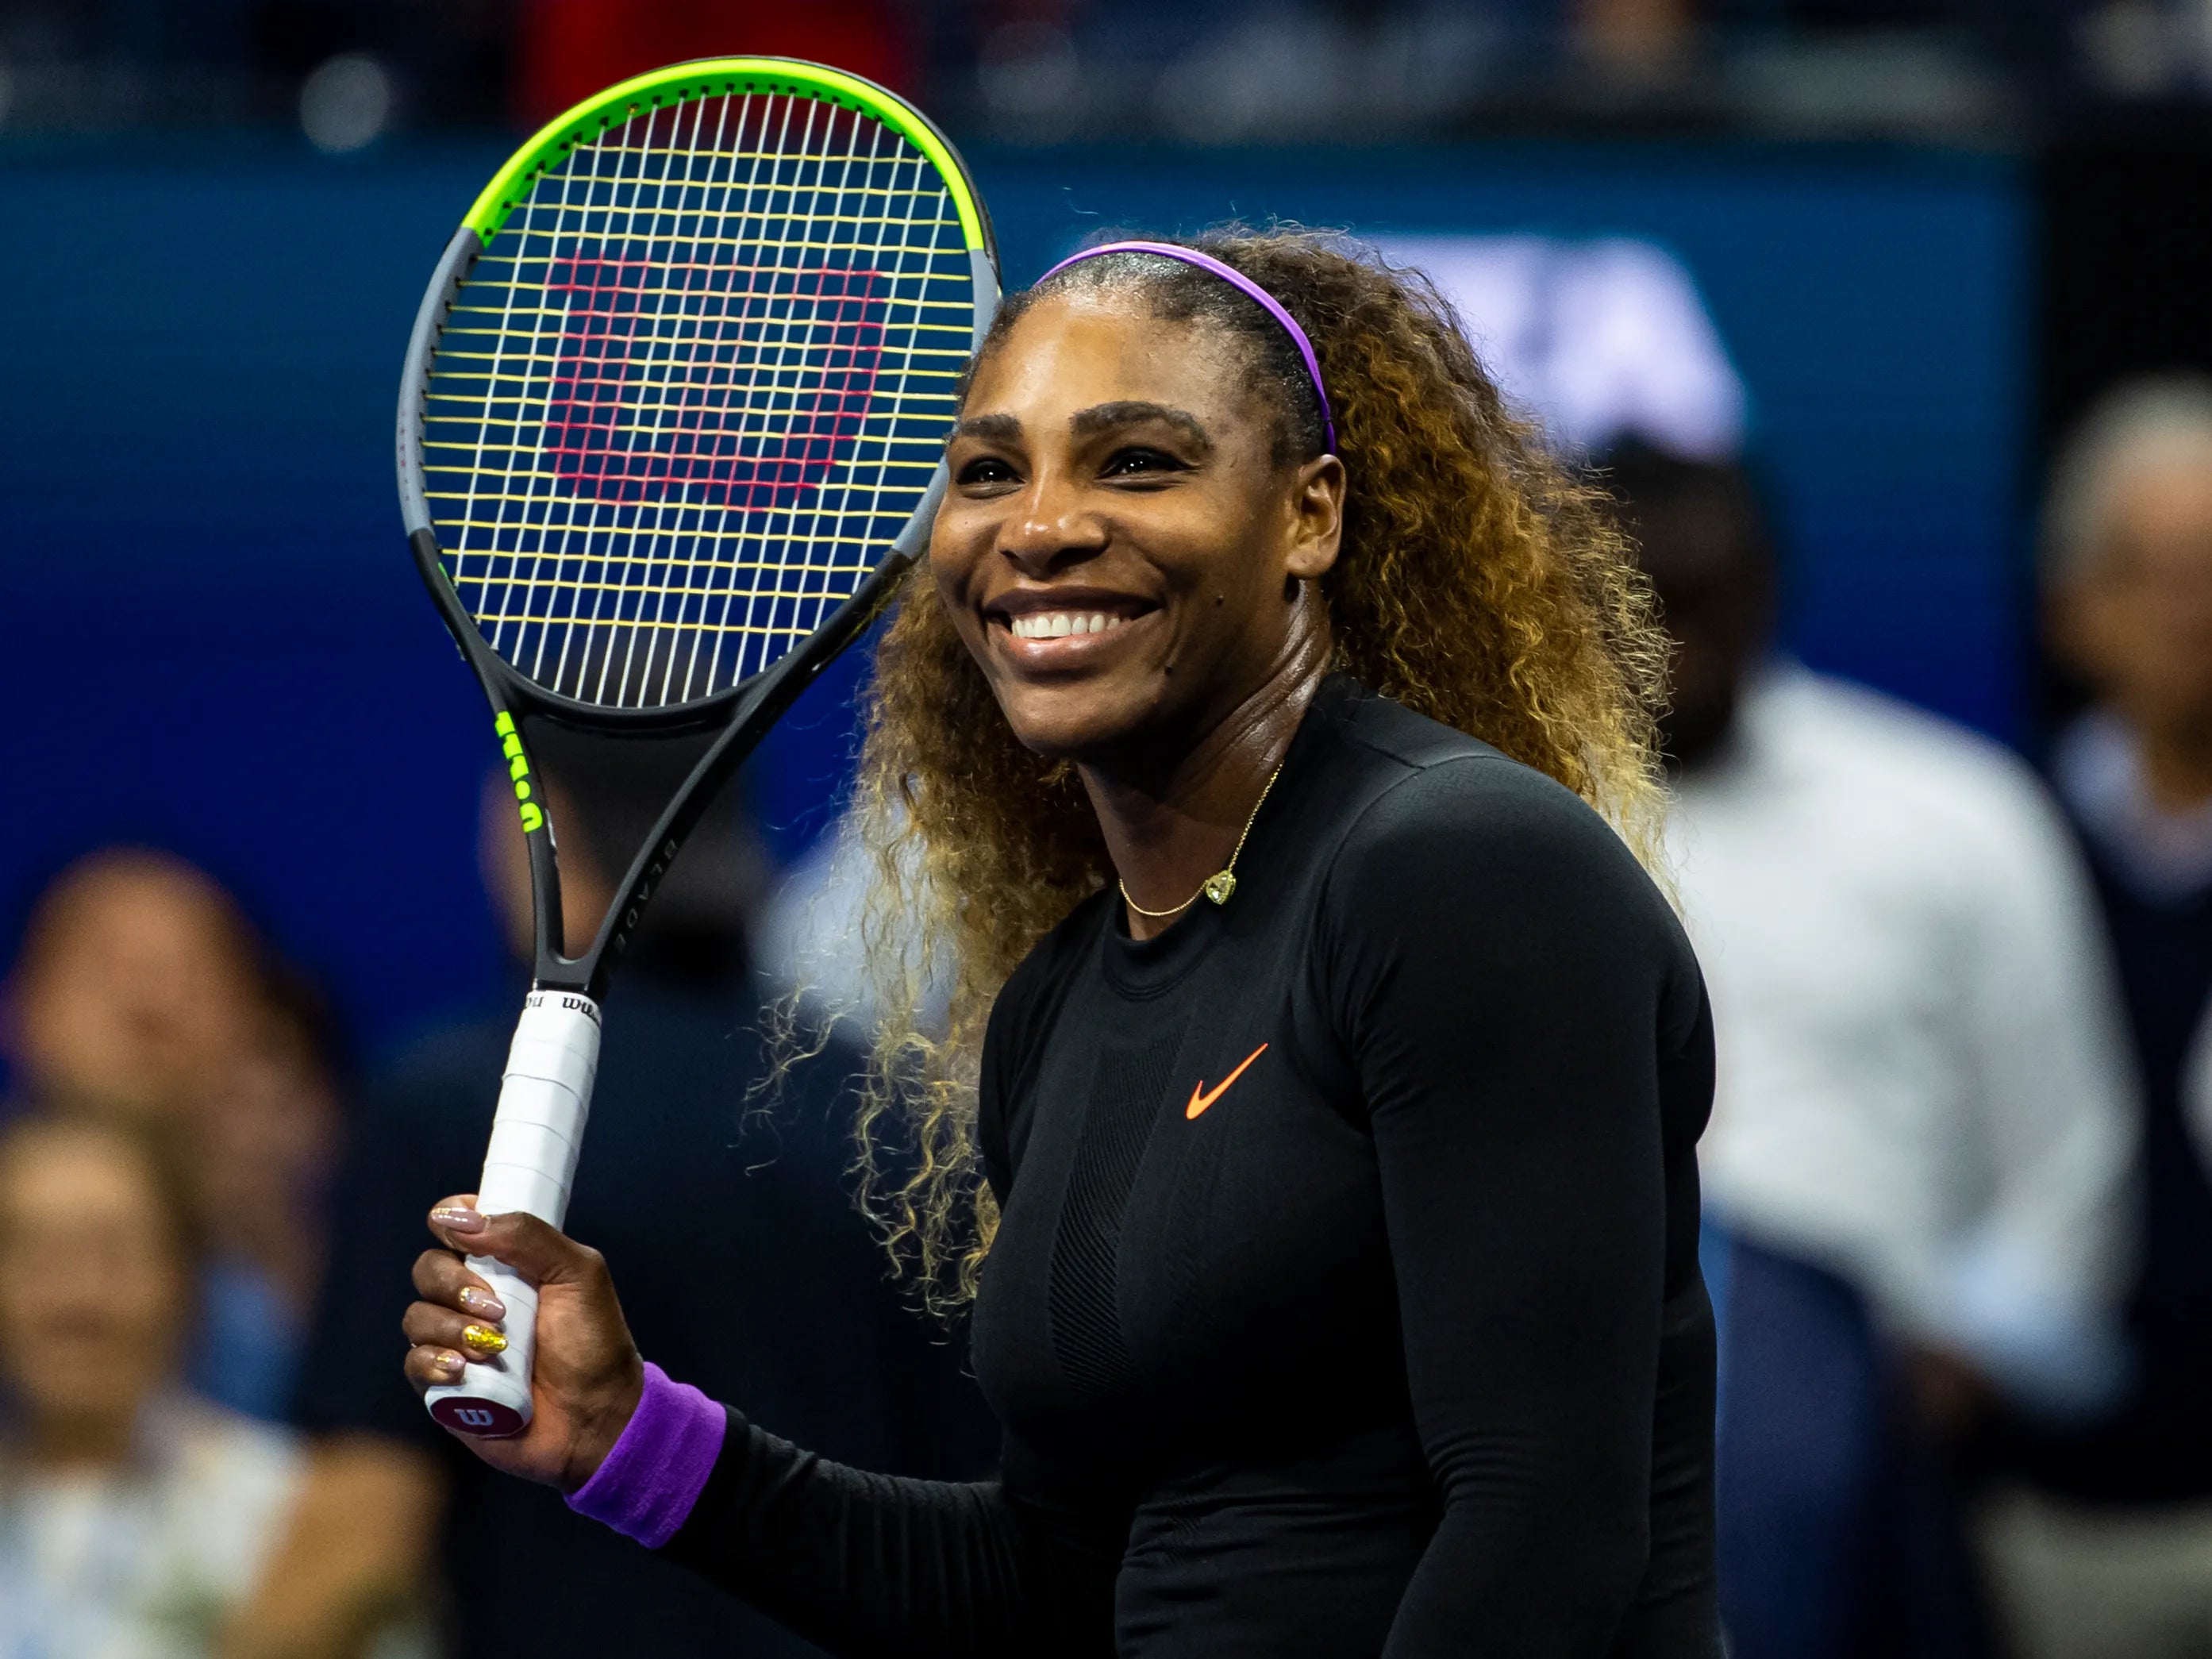 Resumazing  Unstoppable: How Serena Williams Overcame Obstacles and  Persevered to Become a Champion